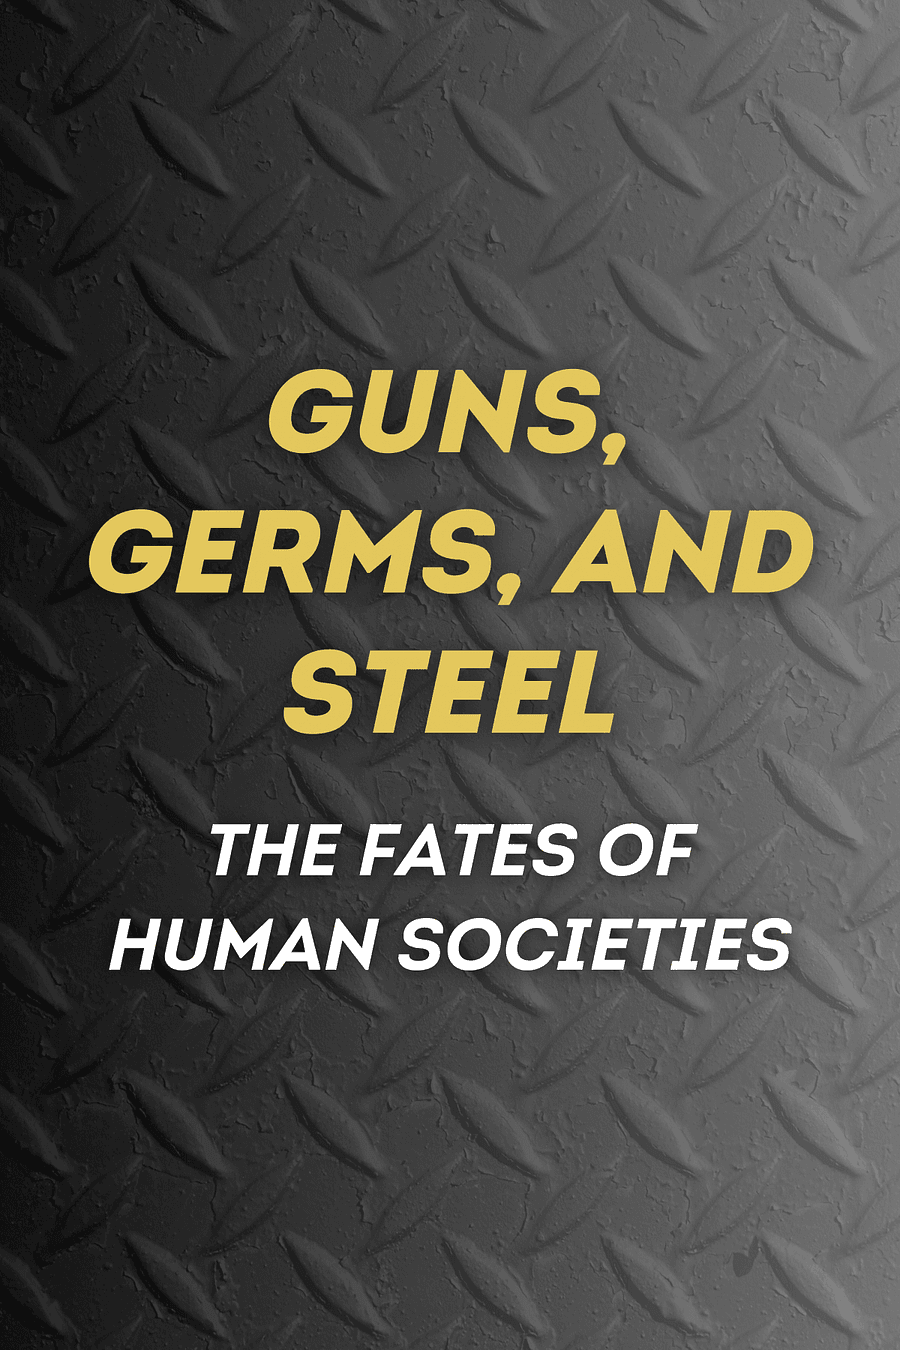 Guns, Germs, and Steel by Jared Diamond - Book Summary